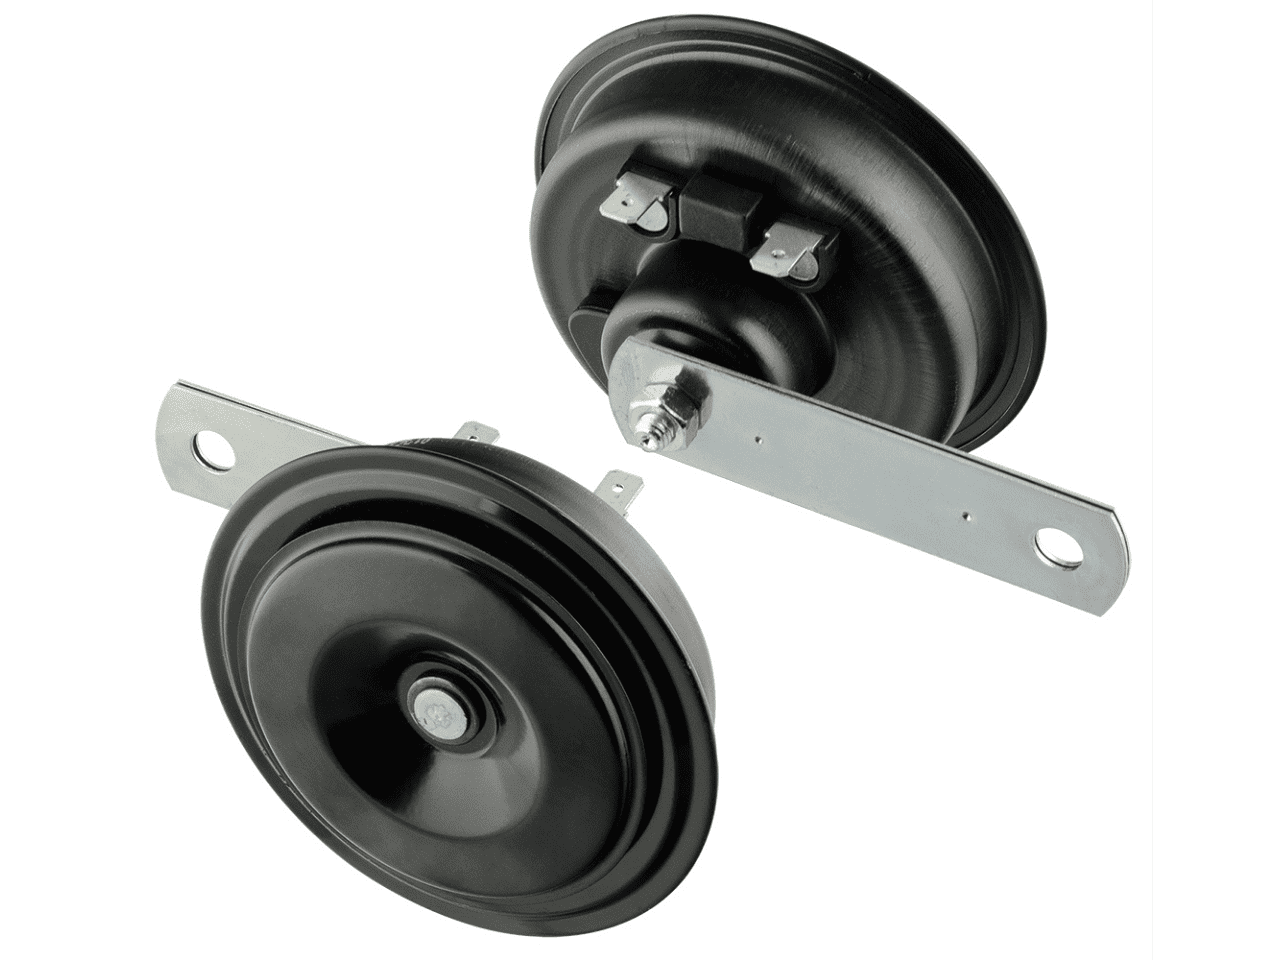 DISC HORN – HIGH/LOW FREQUENCY